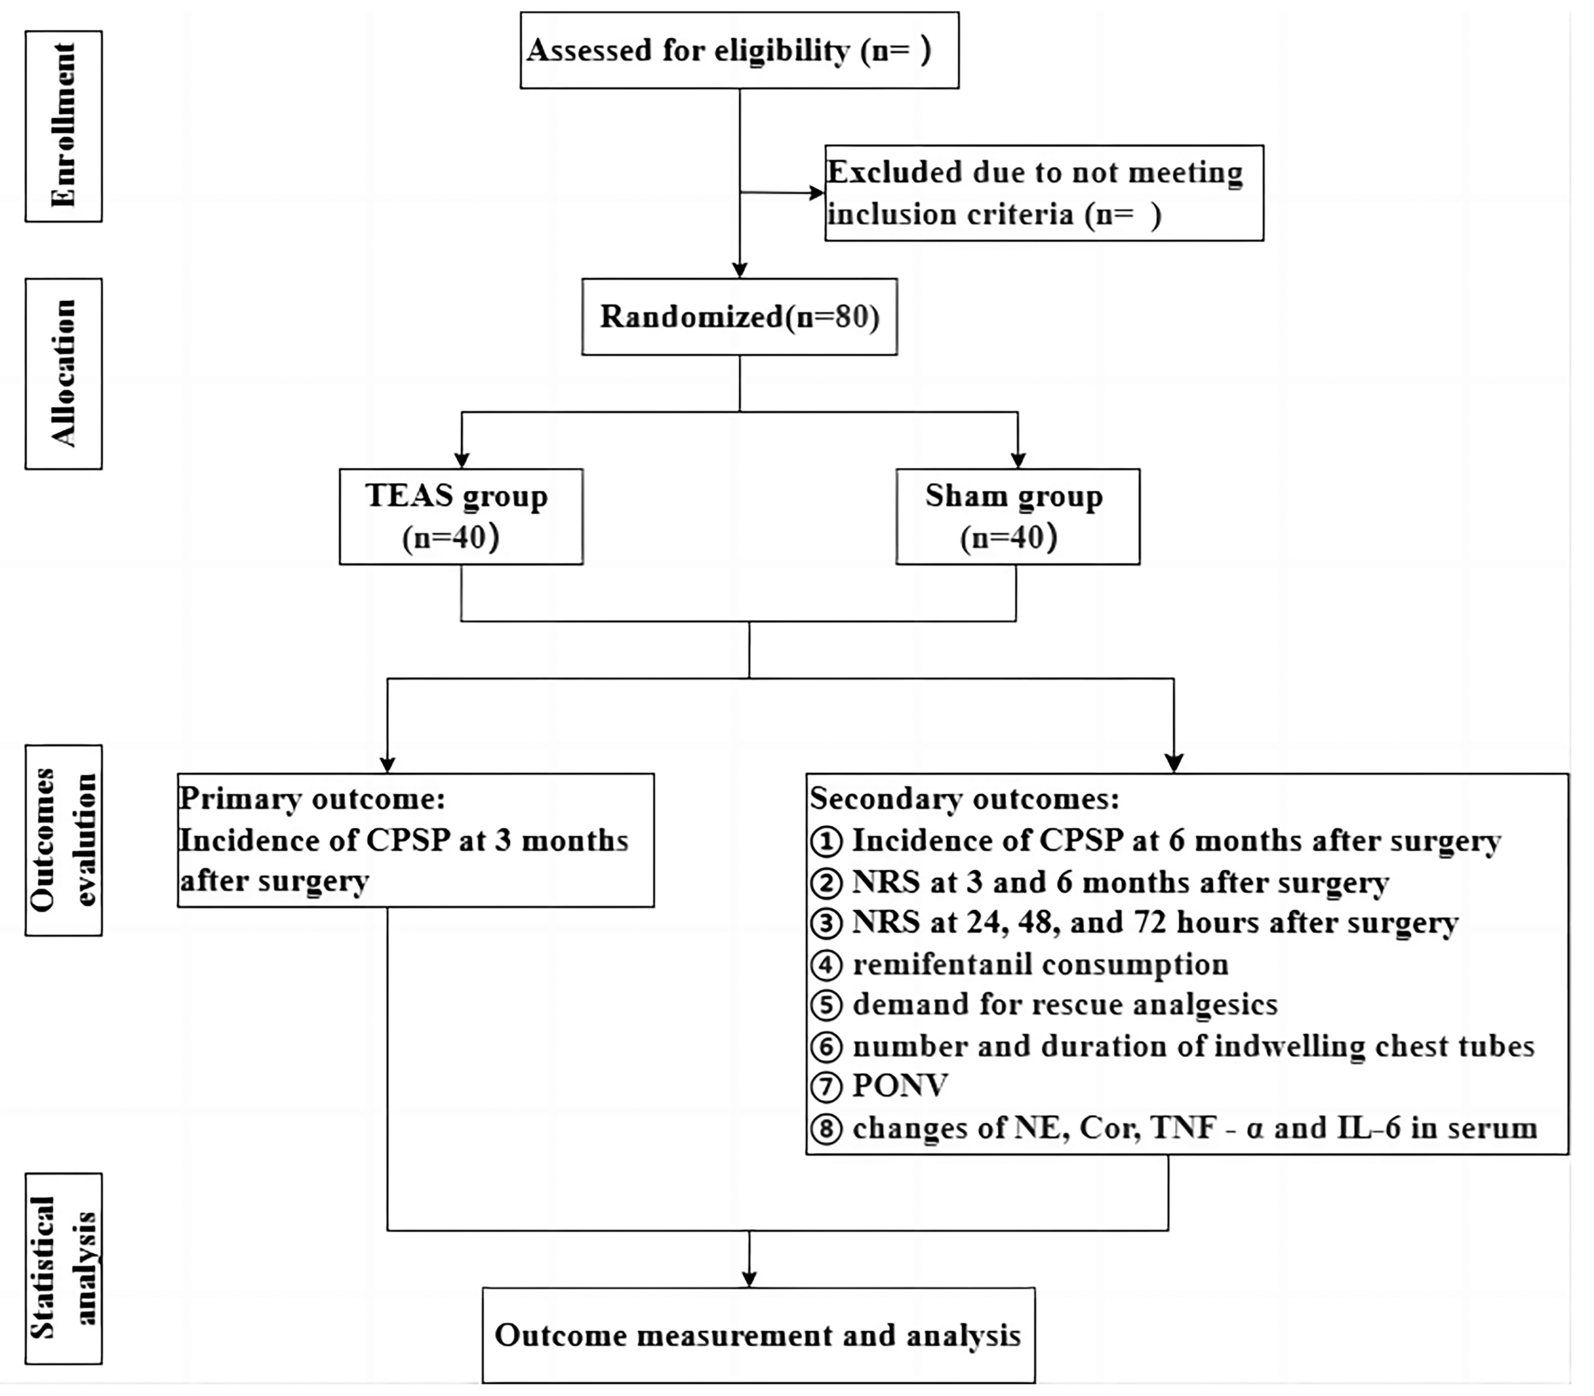 Efficacy of Transcutaneous Electrical Acupoint Stimulation on Chronic Postsurgical Pain After Video-Assisted Thoracoscopic Lobectomy: Study Protocol for a Prospective Randomized Controlled Trial